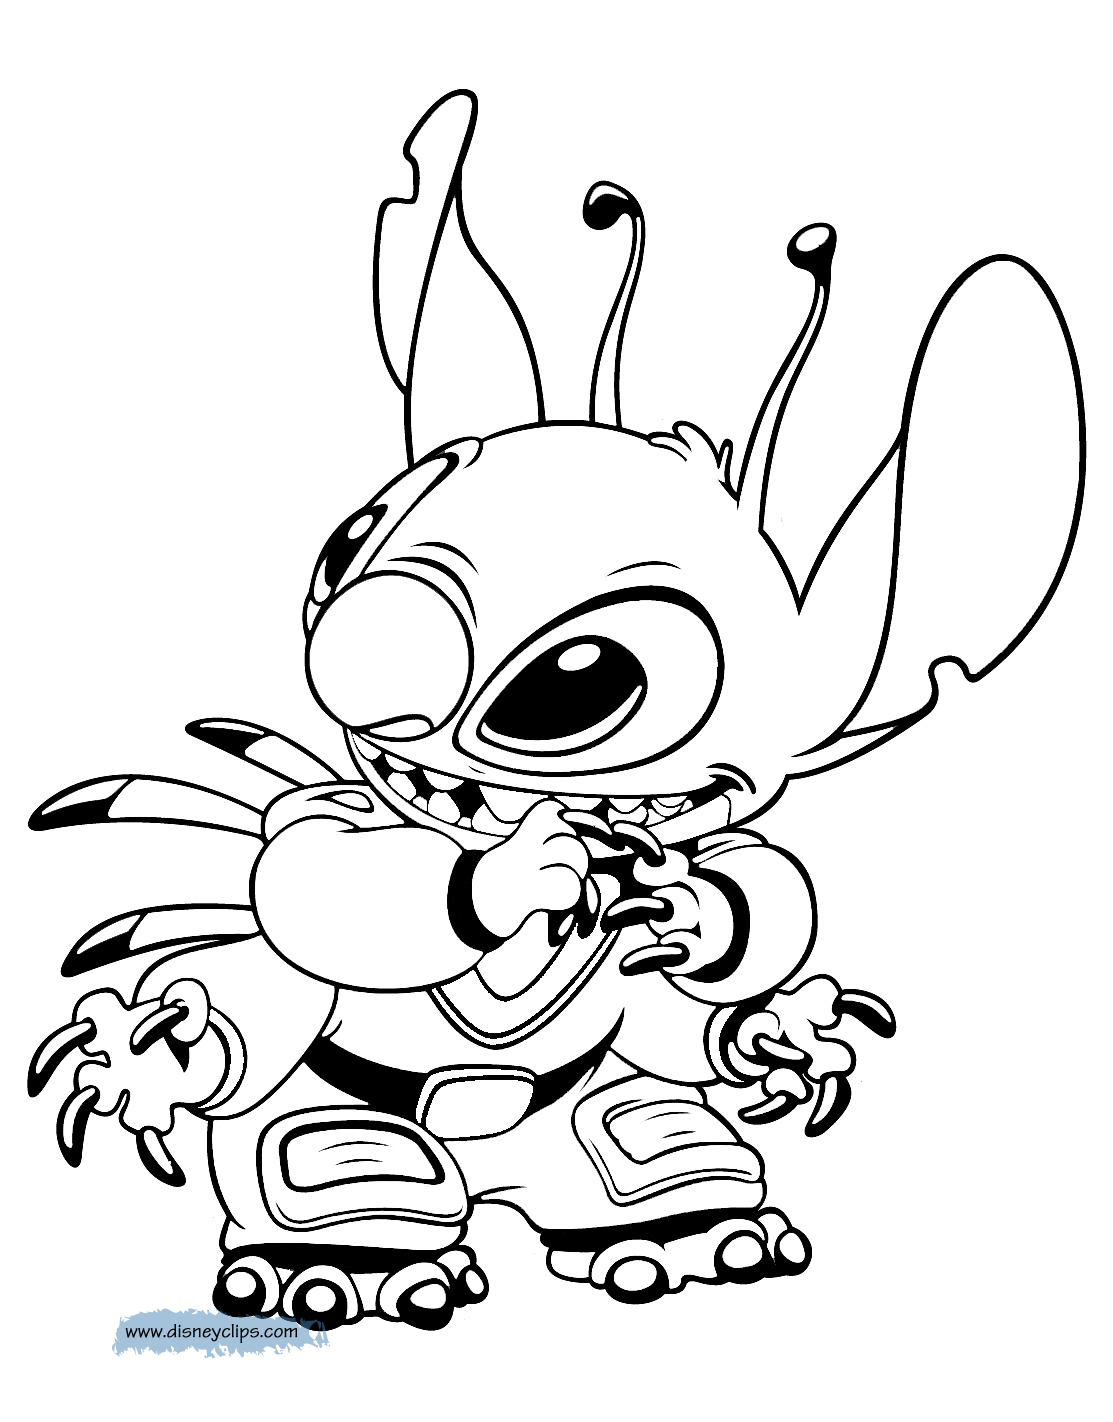 Lilo and Stitch Printable Coloring Pages 2 | Disney Coloring Book